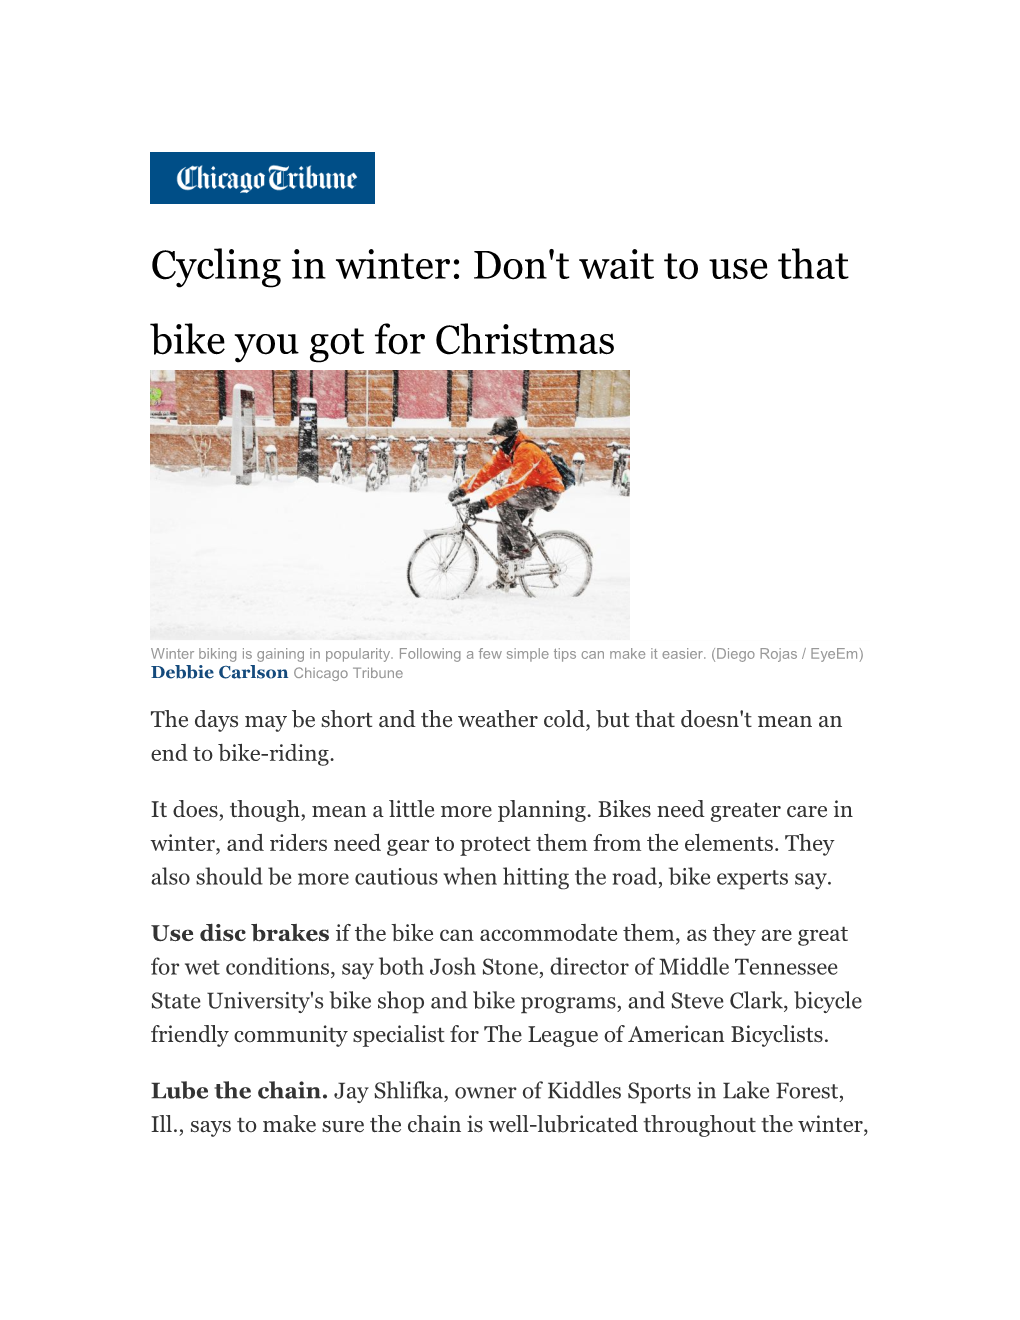 Cycling in Winter: Don't Wait to Use That Bike You Got for Christmas